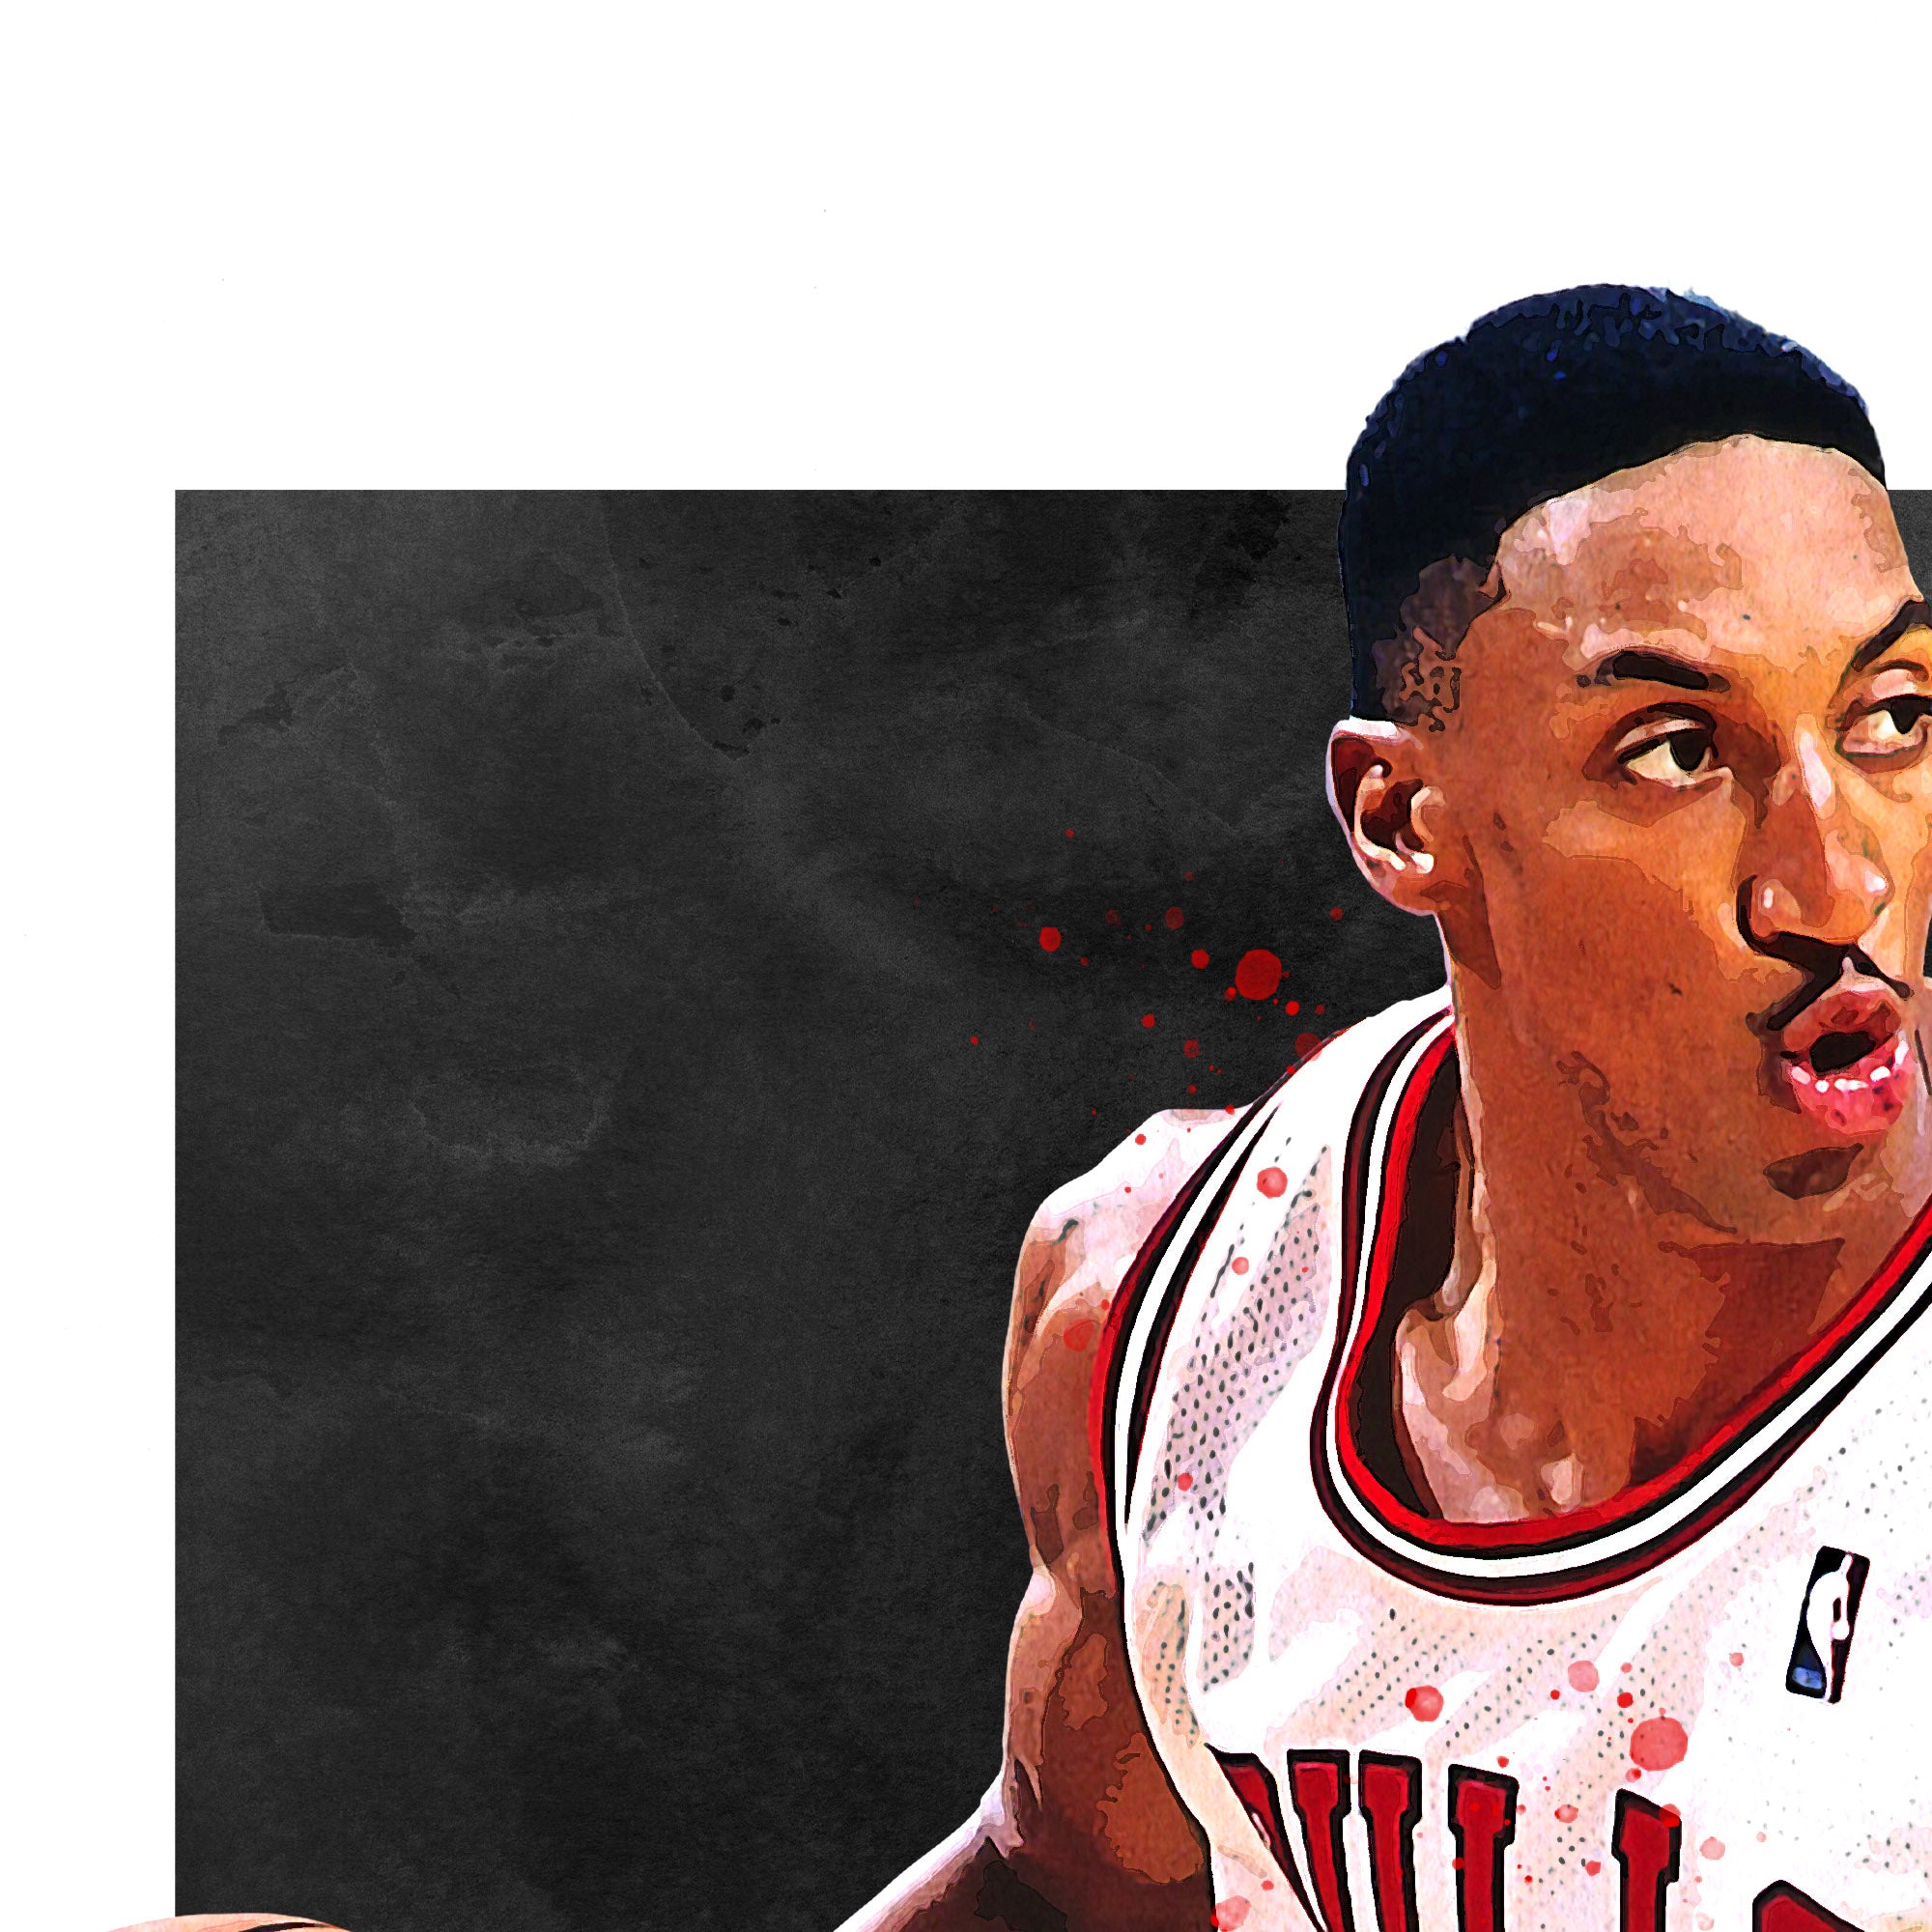  Scottie Pippen Posters Basketball Photo Canvas Wall Art Decor  Paintings Picture for Home Living Room Decoration  Unframe:16×24inch(40×60cm): Posters & Prints